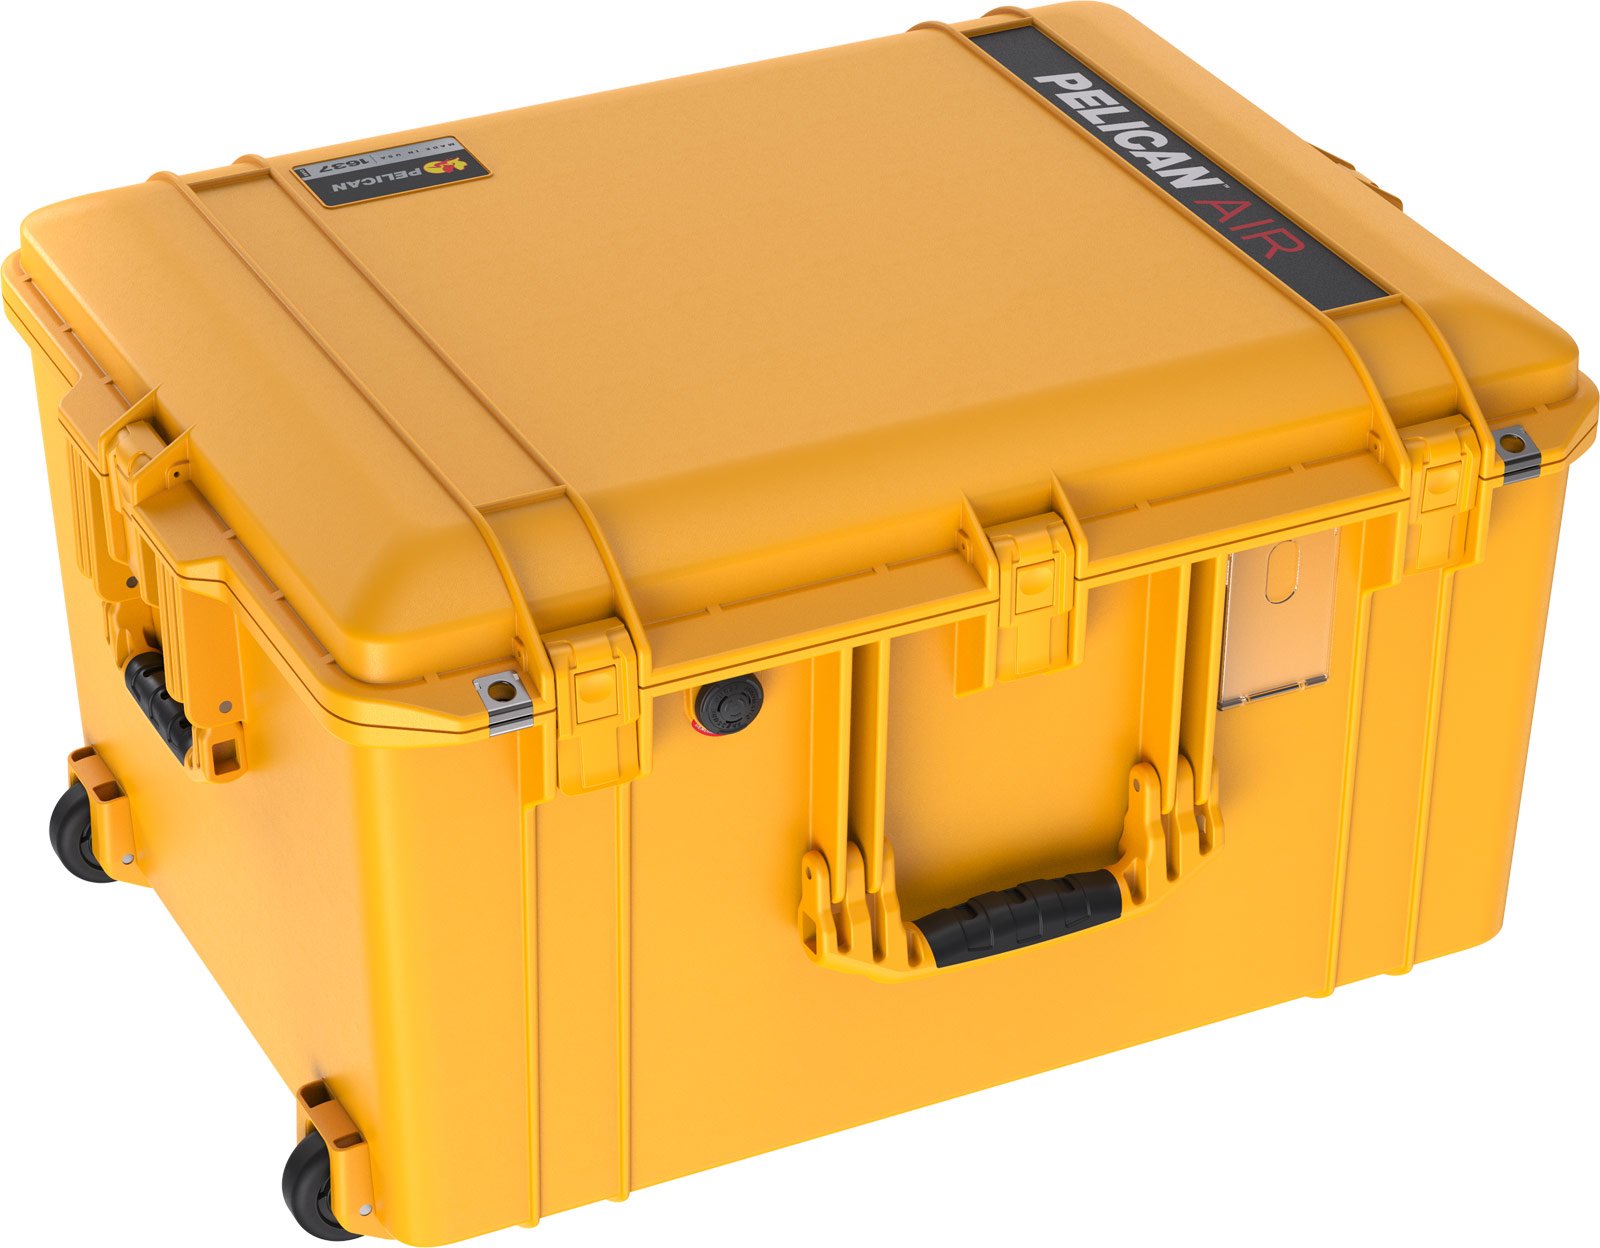 Pelican Protector Case 1637 Air Case - With Foam - Yellow